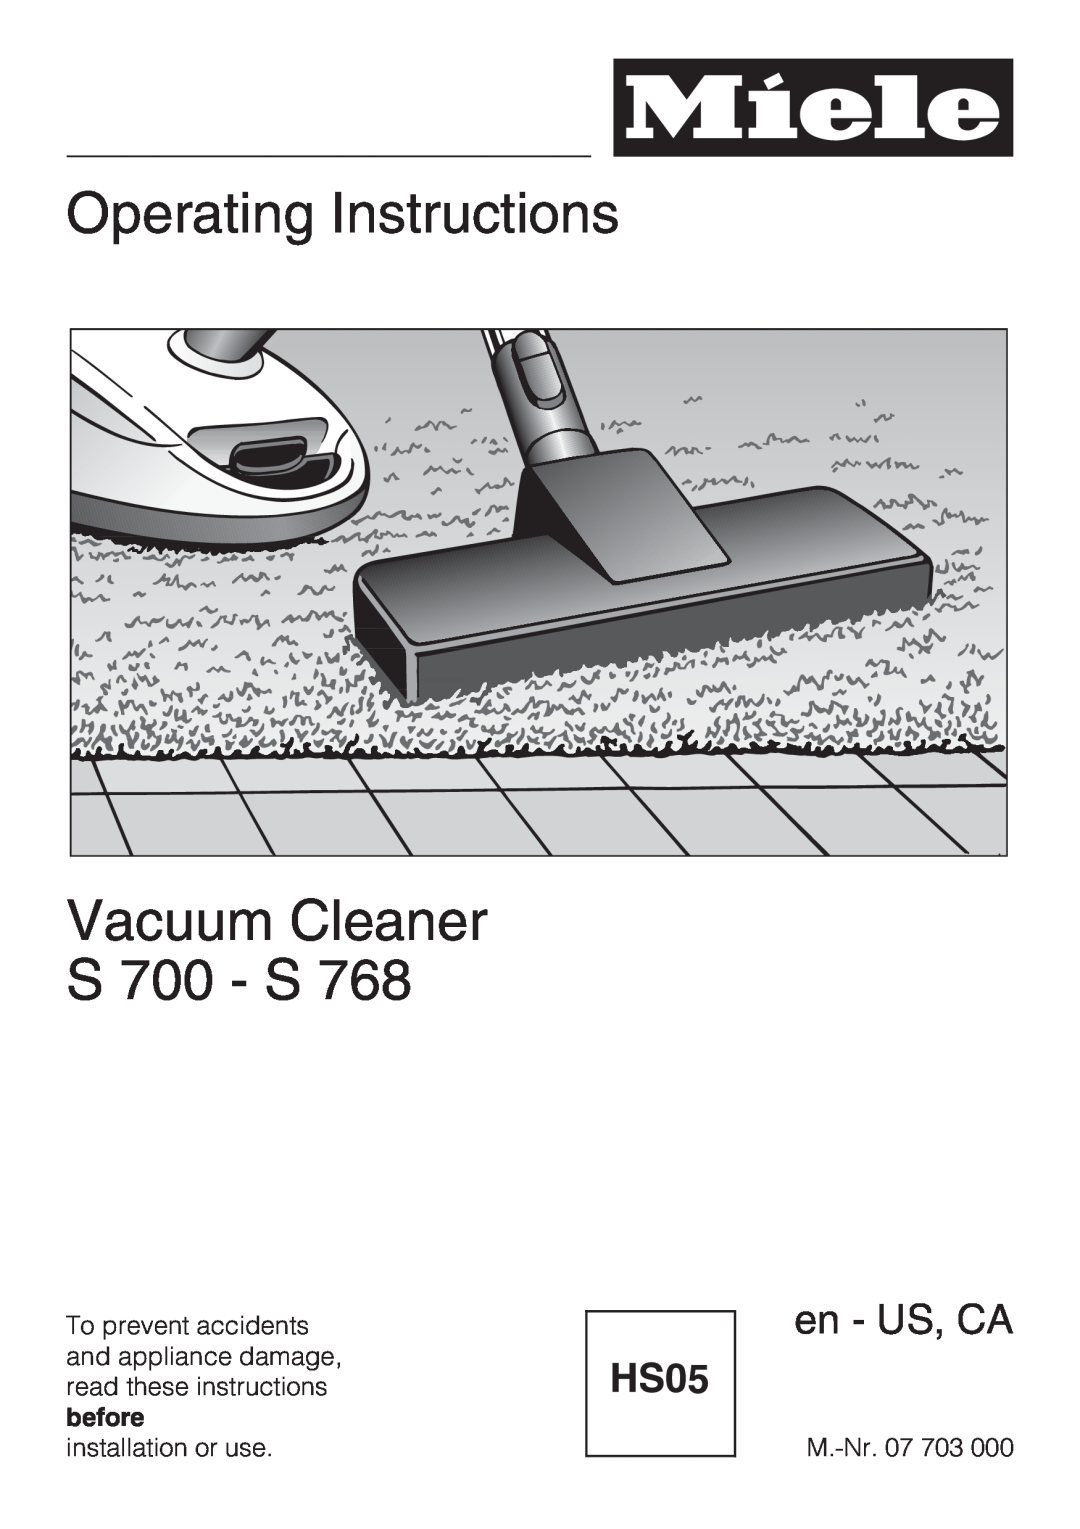 Miele S 768 manual Operating Instructions, Vacuum Cleaner, S 700 - S, en - US, CA 